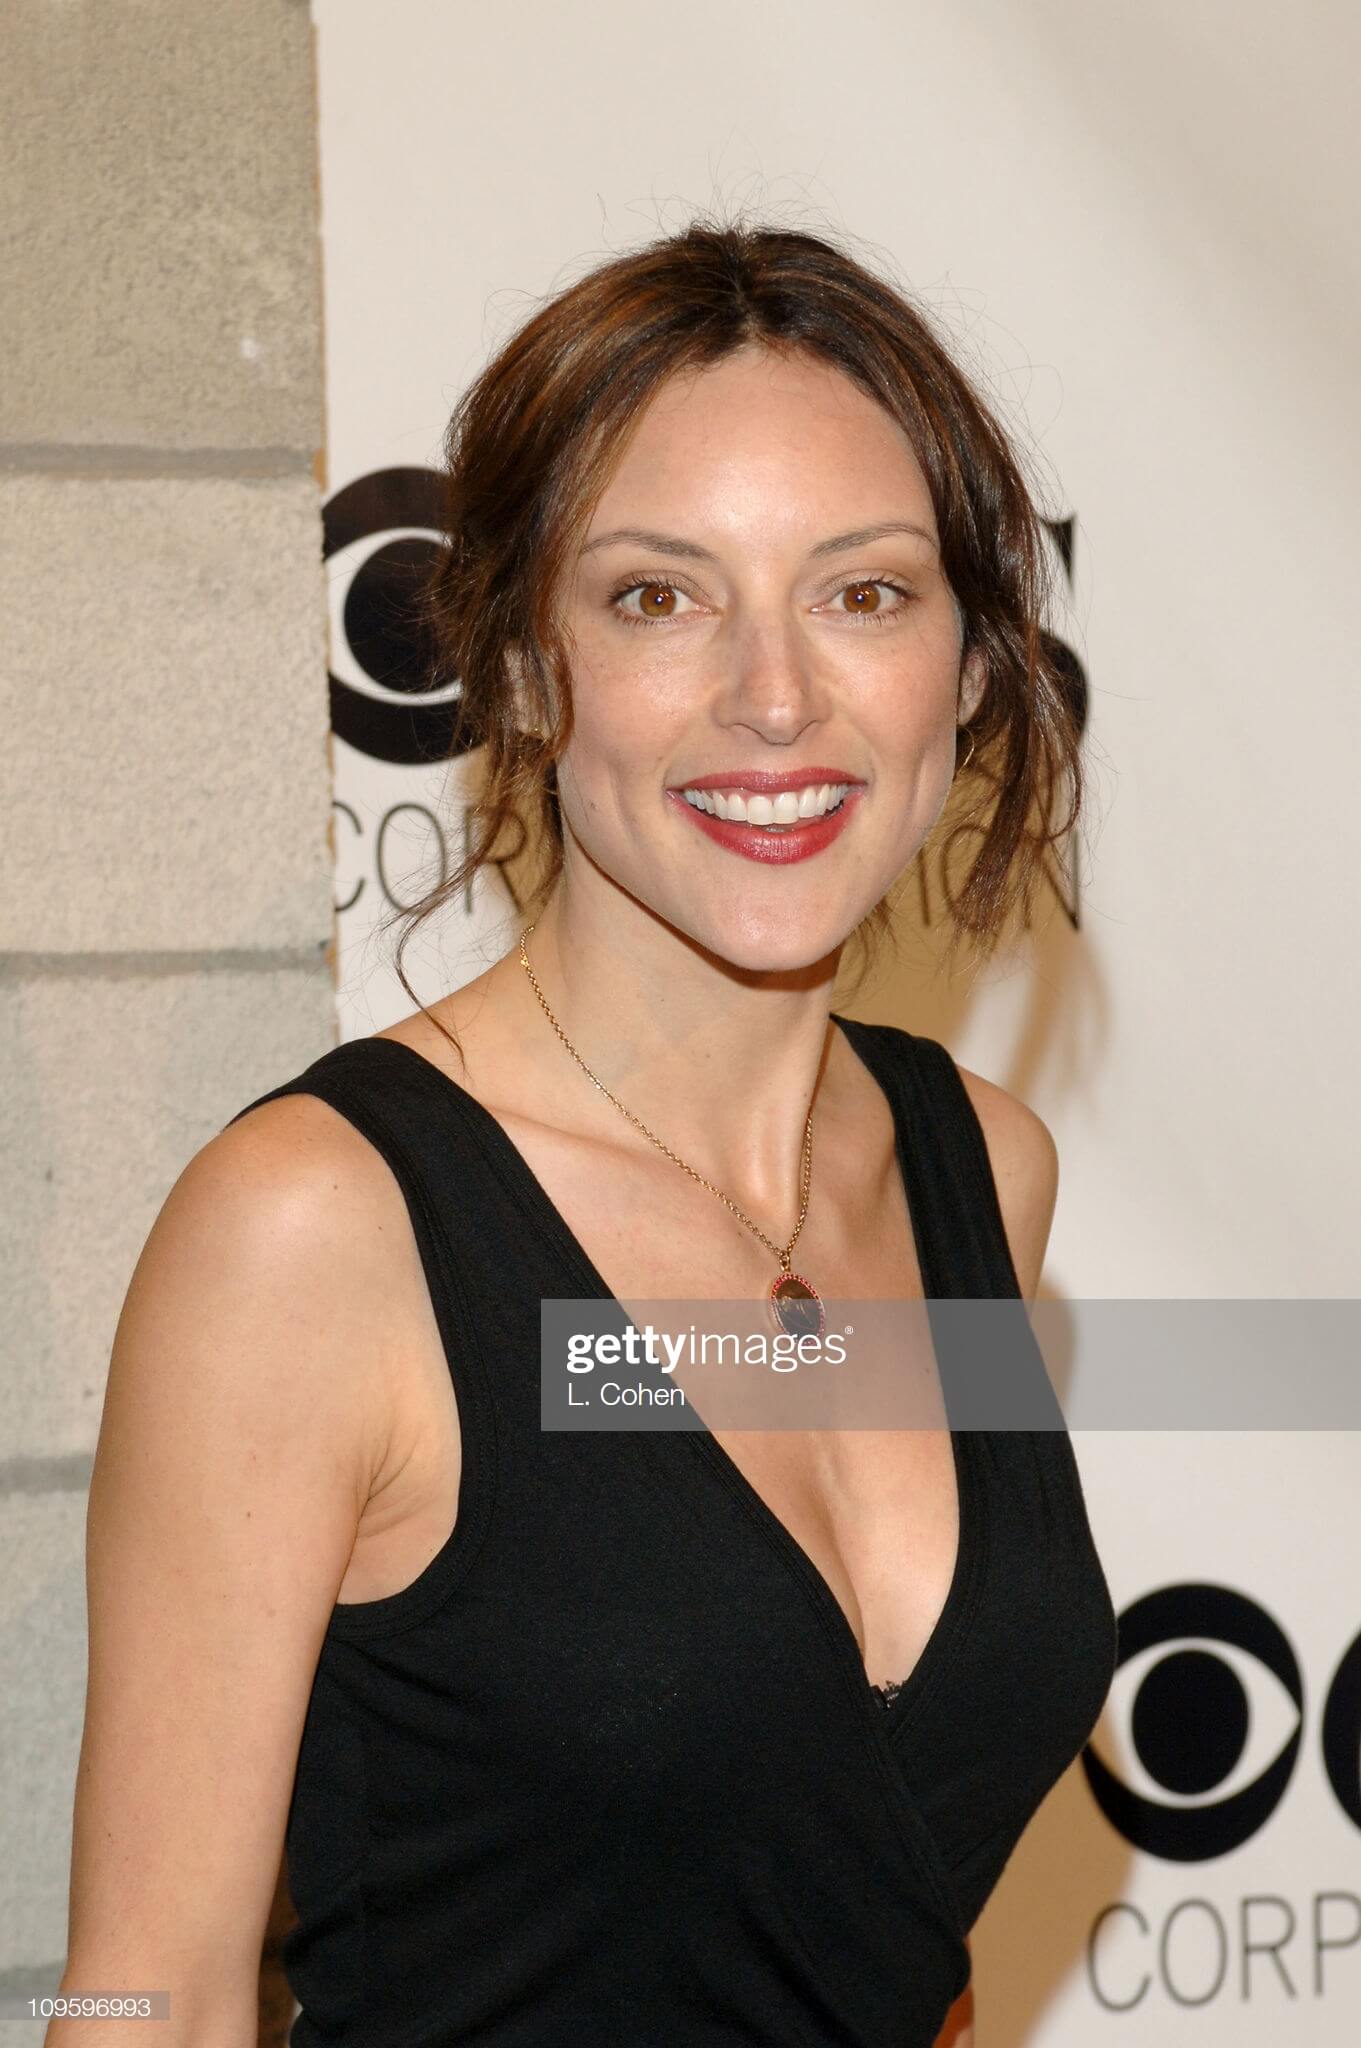 50 Hot Lola Glaudini Photos Will Make Your Day Better.